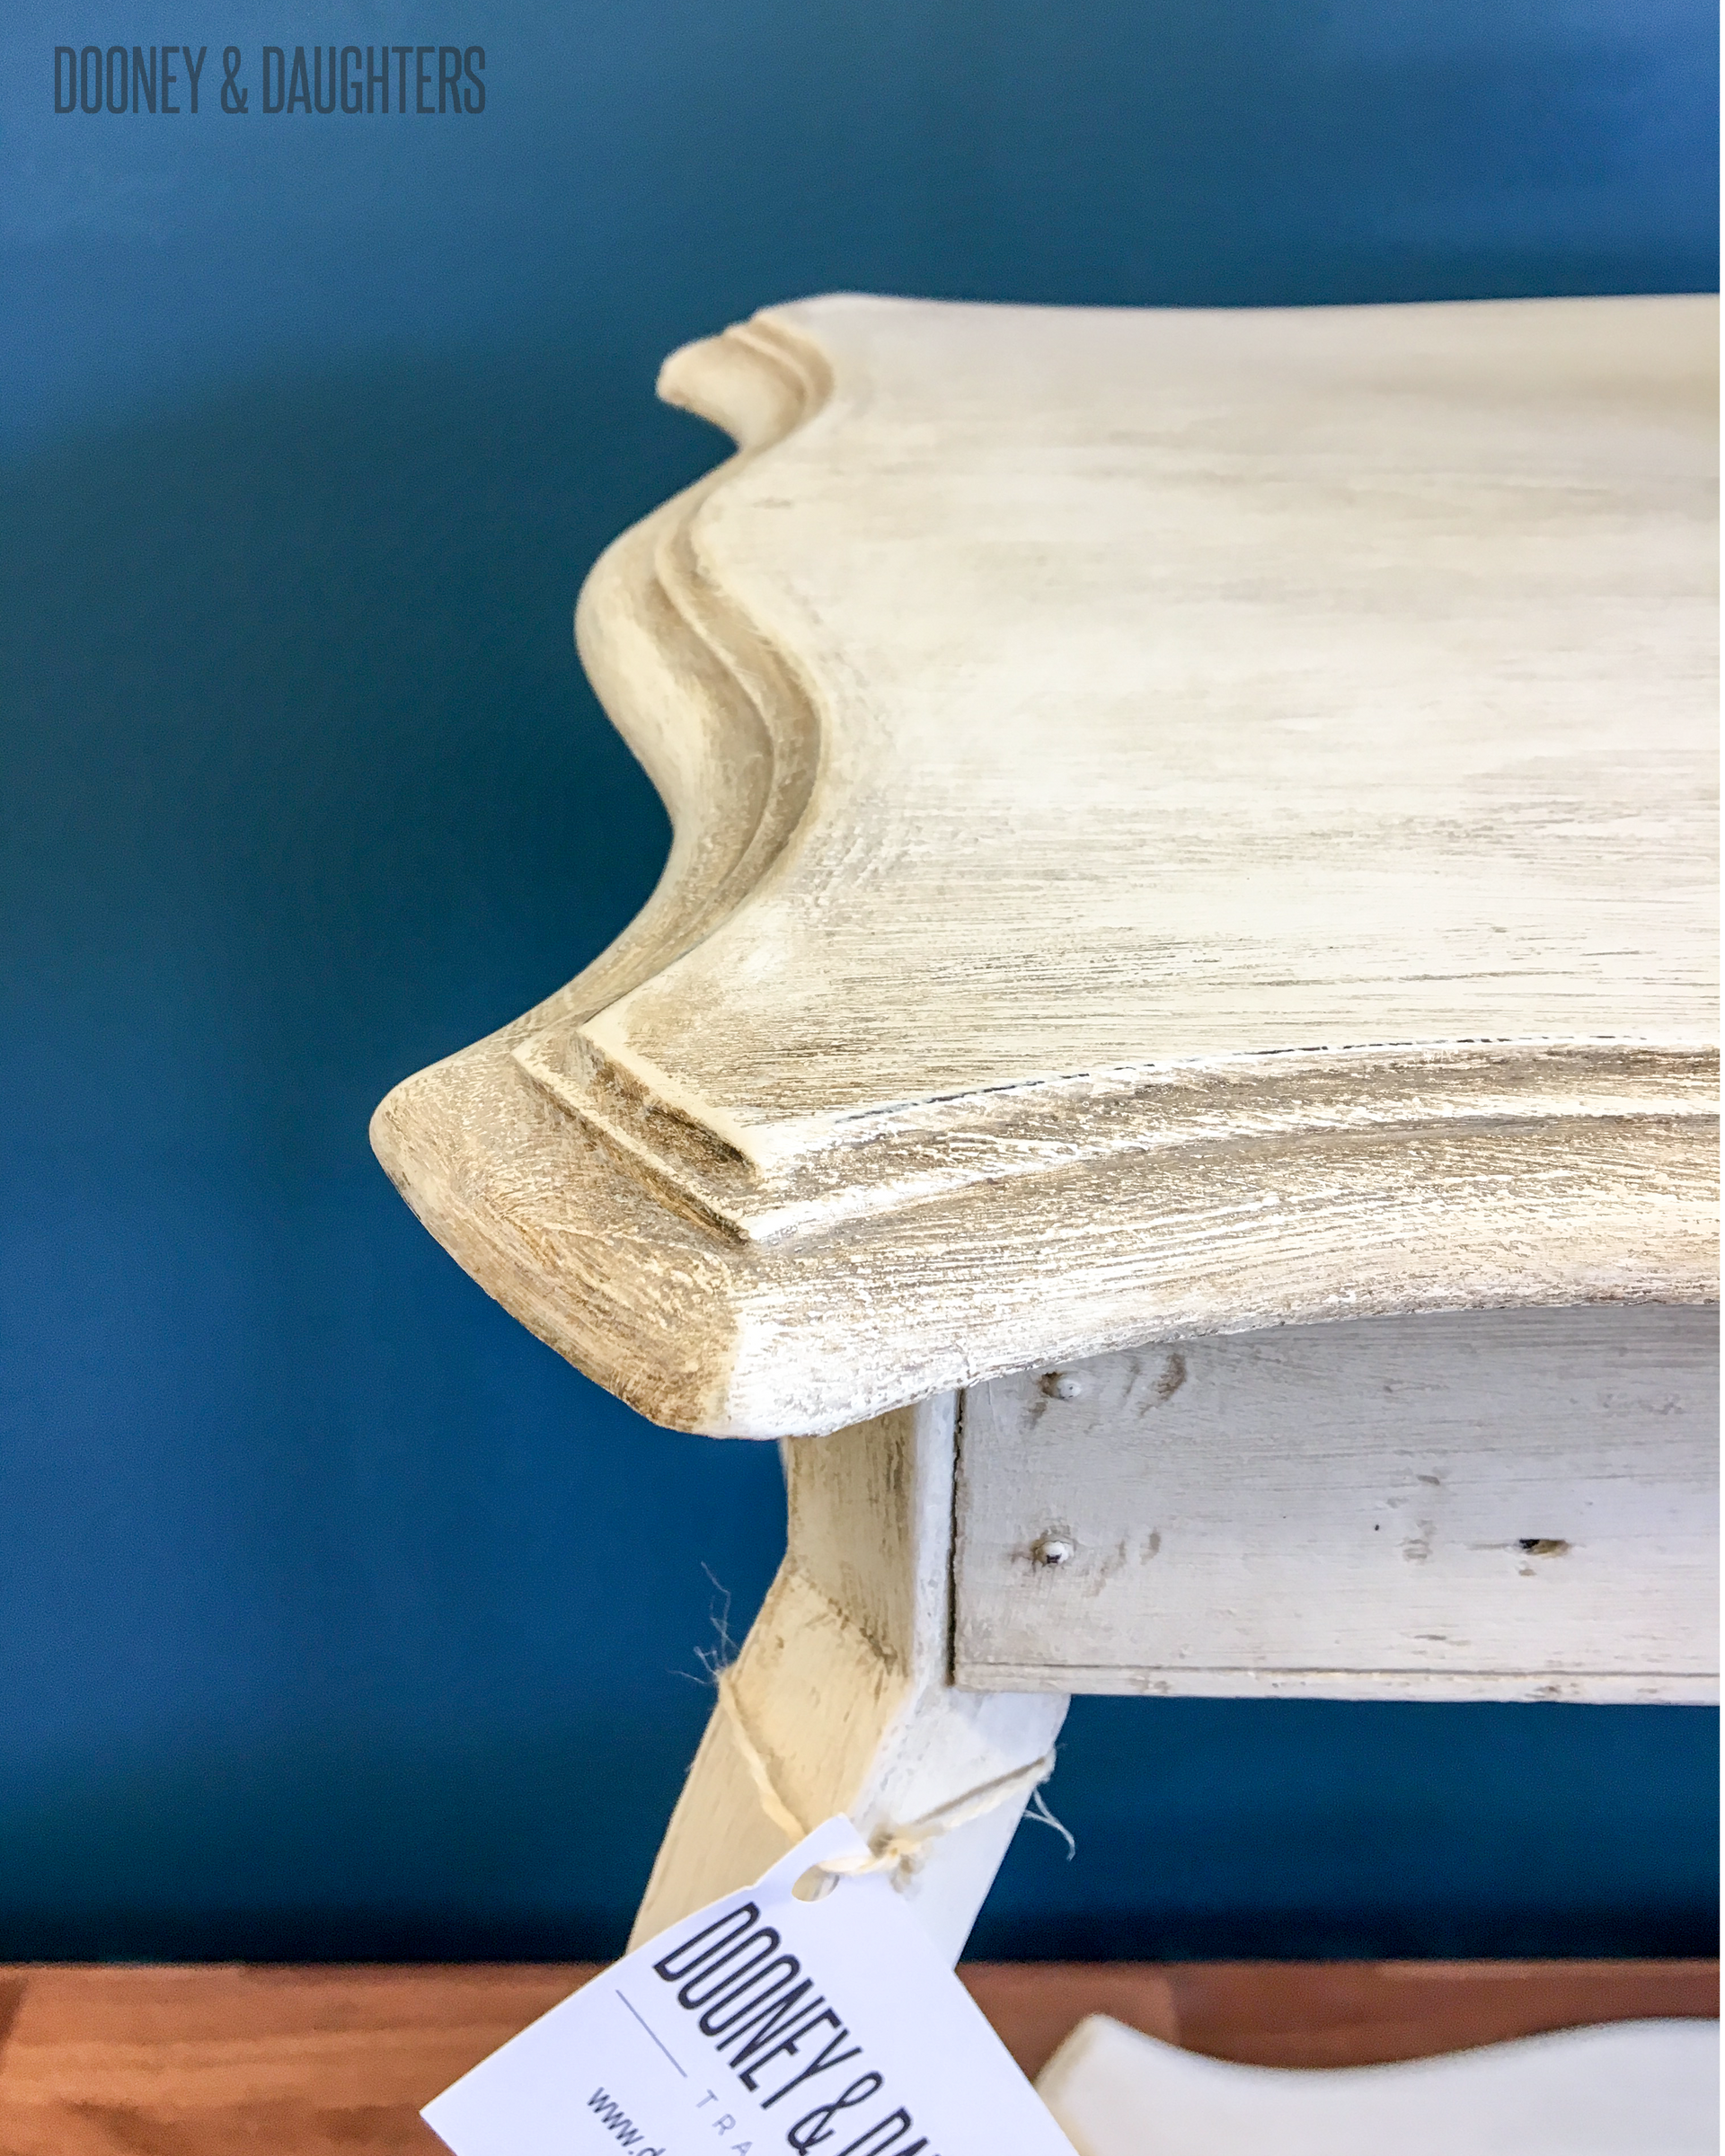 Softly Aged Side Table